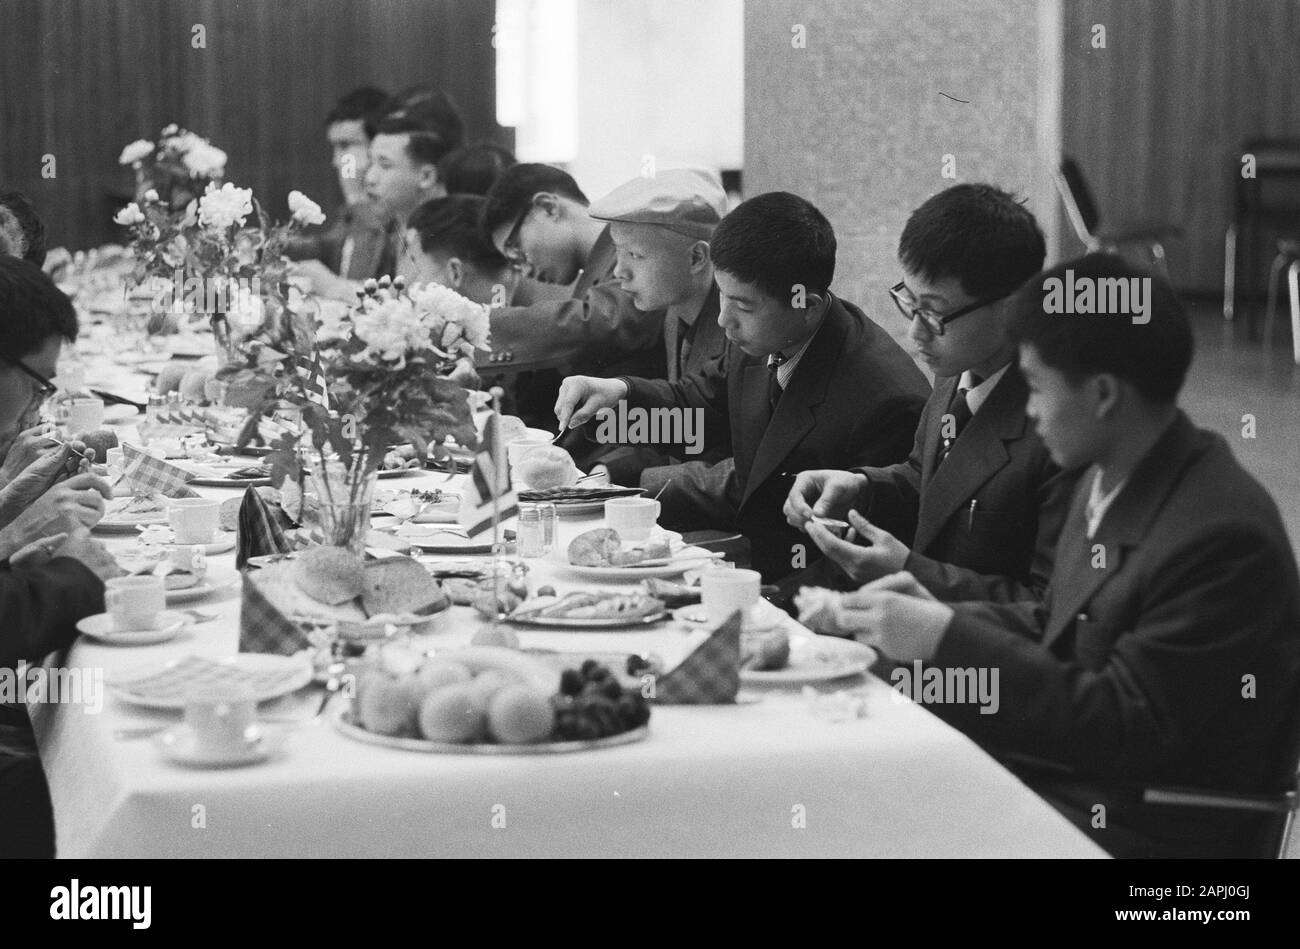 Chinese students at the Technical University of Applied Sciences in Delft Description: Students during lunch Date: 27 February 1979 Location: Delft, Zuid-Holland Keywords: colleges, lunches, students Stock Photo